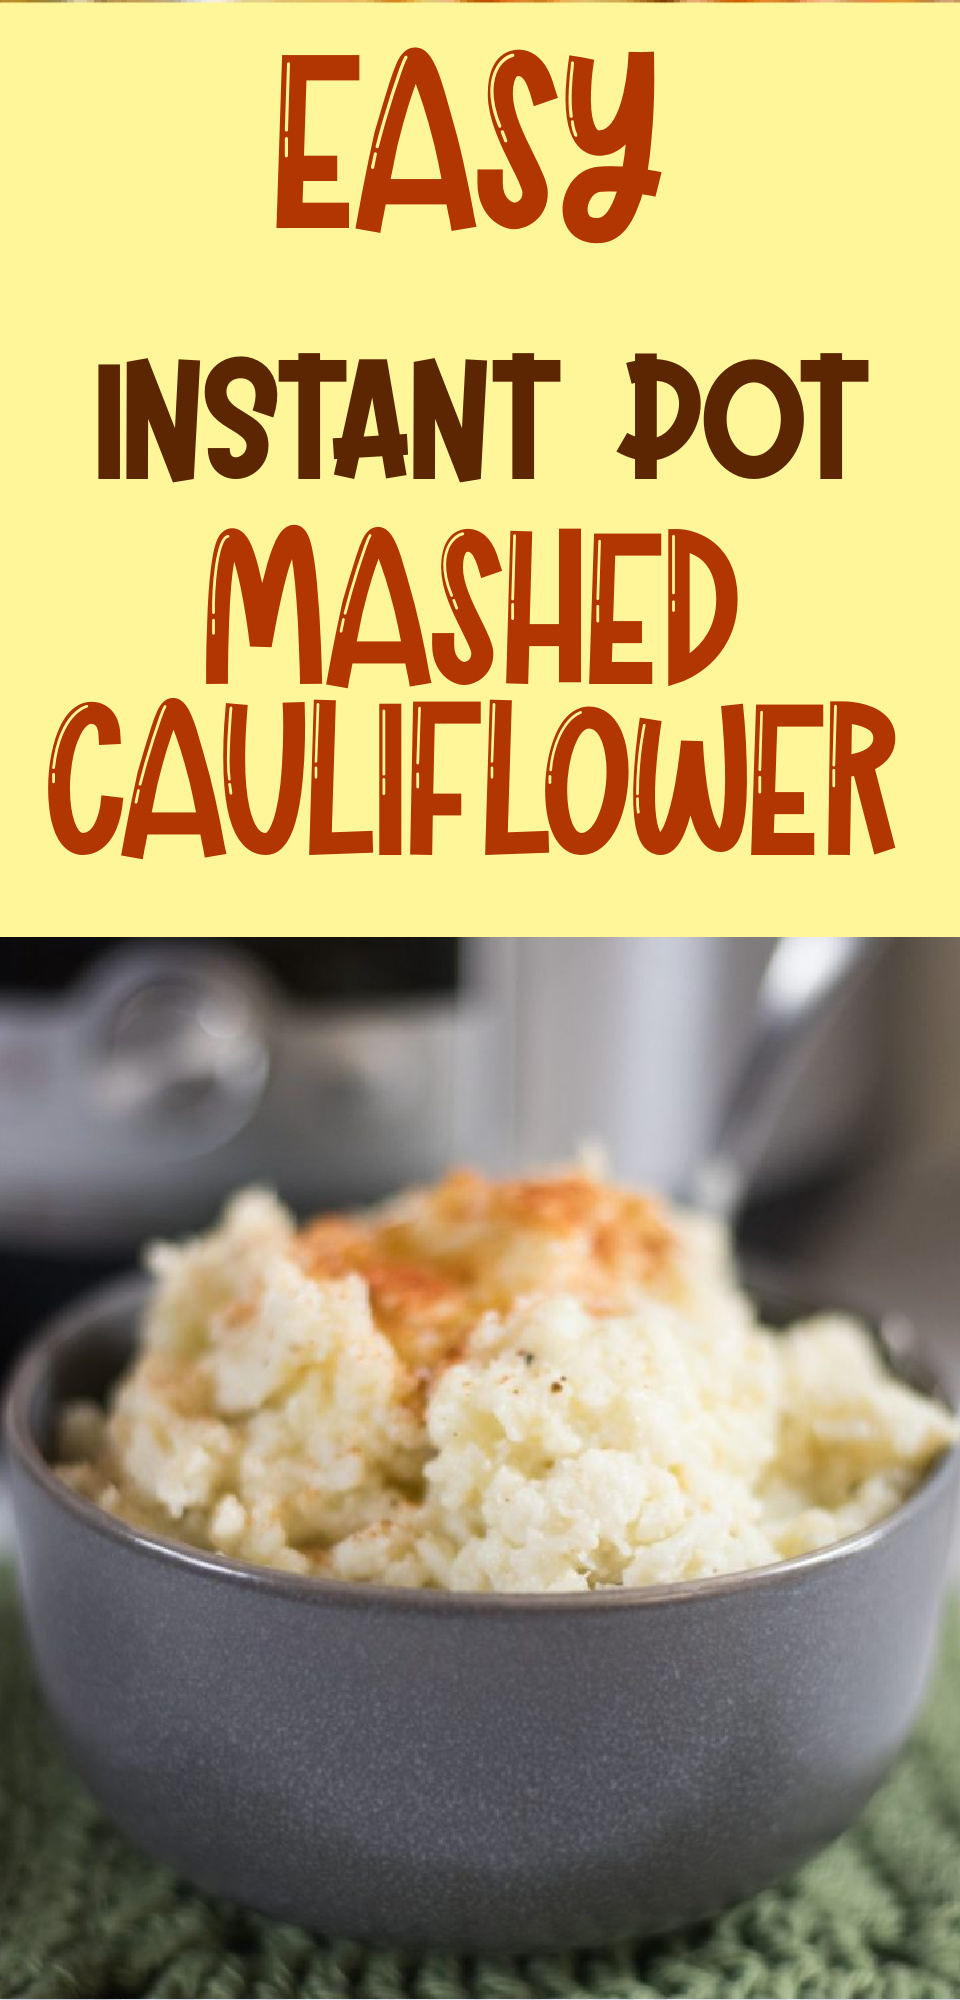 These keto friendly cauliflower mashed potatoes are so good you won't even miss the traditional mashed potatoes. Made in your instant pot they are a fast and easy side dish that will become a family favorite in no time!